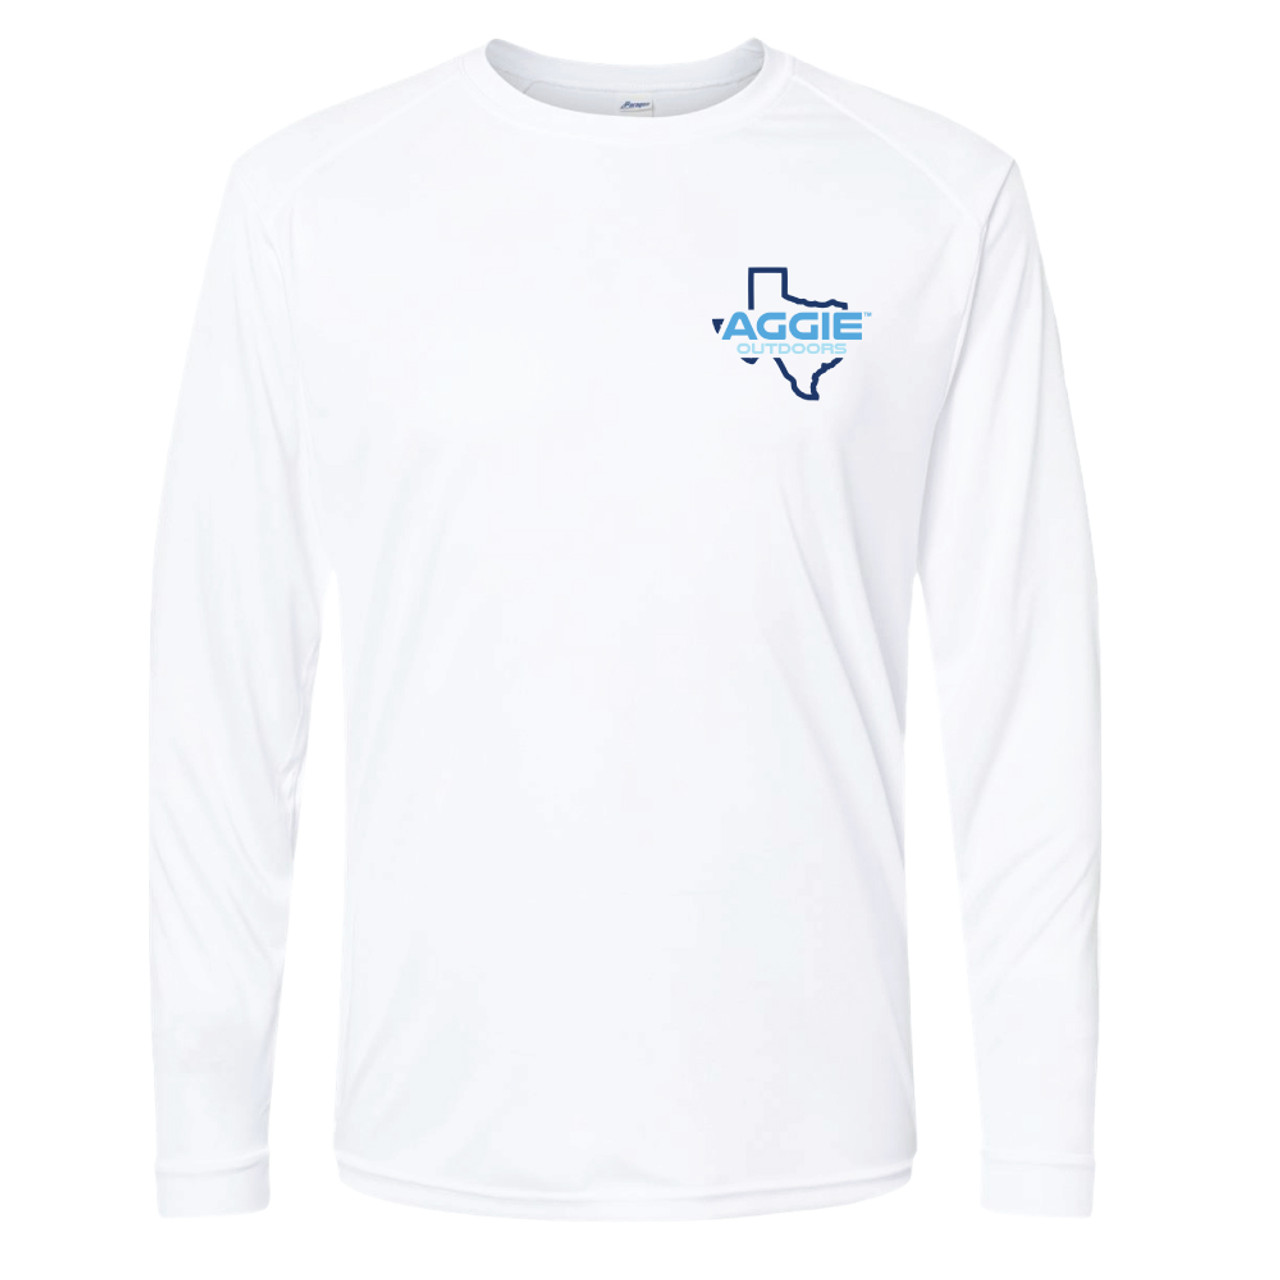 Aggie Outdoor Sailfish White Long Sleeve - The Warehouse at C.C. Creations